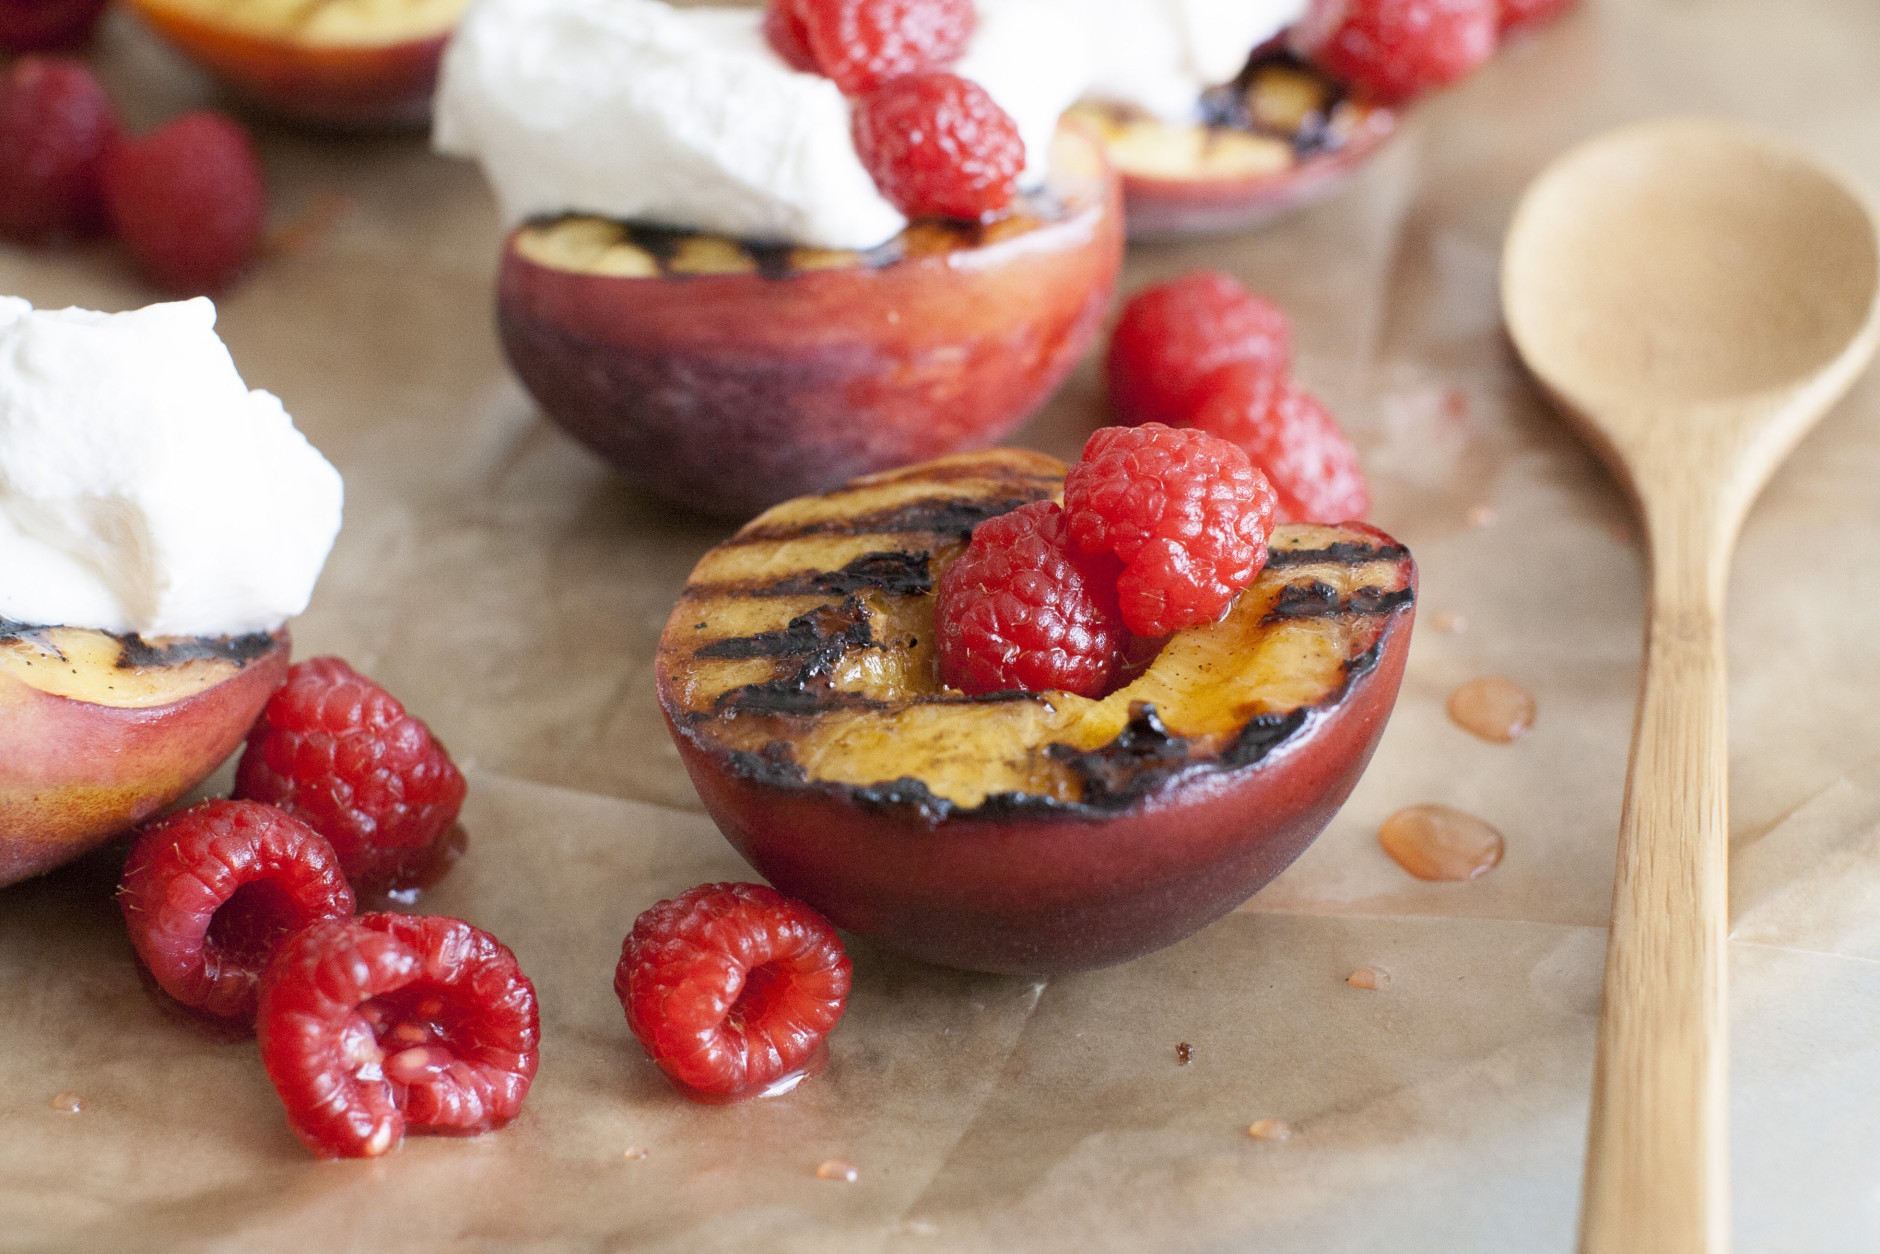 This June 2, 2014 photo shows grilled peaches, berries and cream in Concord, N.H. It is a grilled dessert that is simple and takes just minutes to cook and assemble. (AP Photo/Matthew Mead)